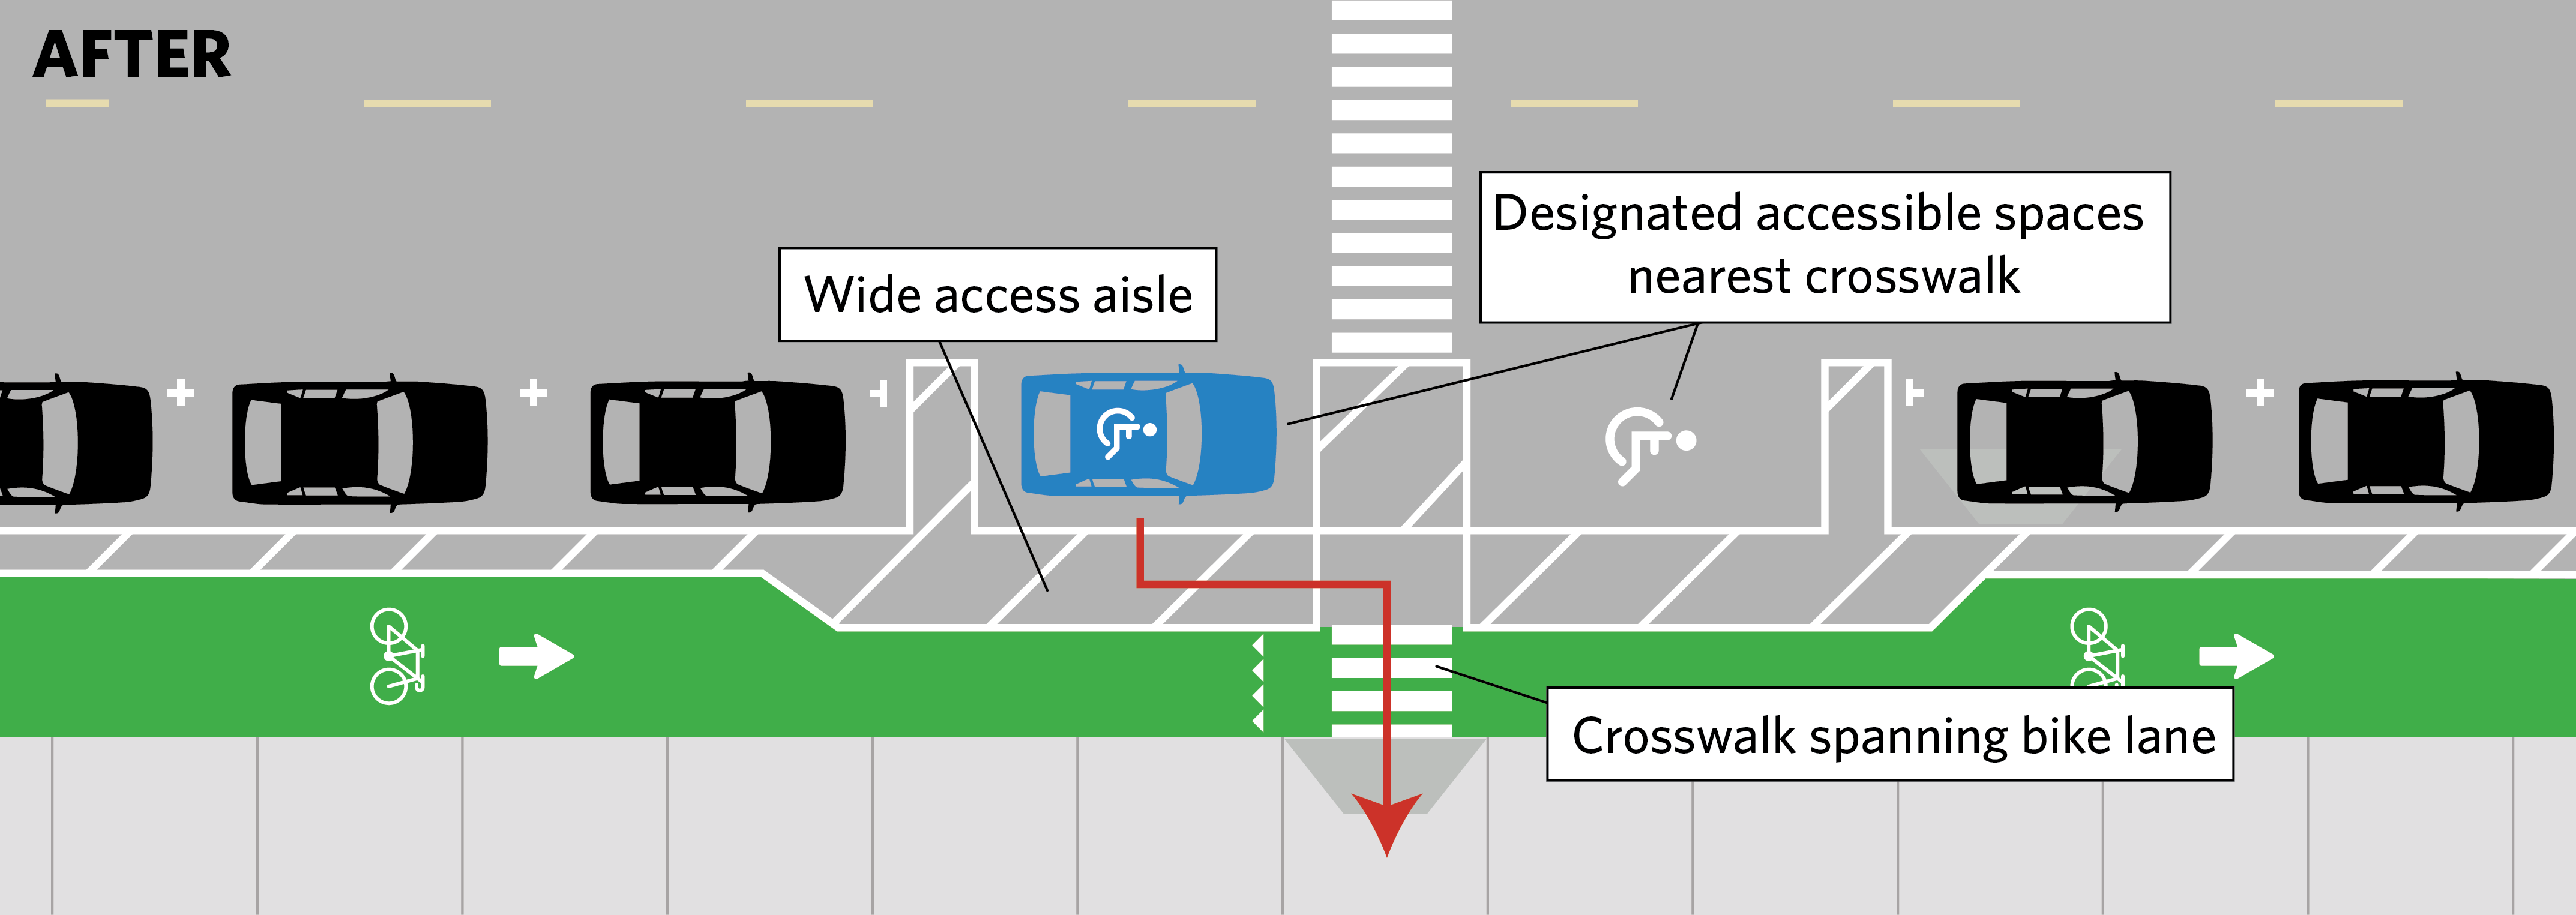 Overhead diagram of a street labeled "After," with two driving lanes, one parking lane, an access aisle, a bike lane, and a sidewalk. There is a crosswalk that goes from one side of the road until the sidewalk, including over the bike lane. There are two accessible parking spots, one on either side of the crosswalk. The spots are buffered by painted access space. The access aisle between the parking lane and bike lane is wider near the accessible spots.